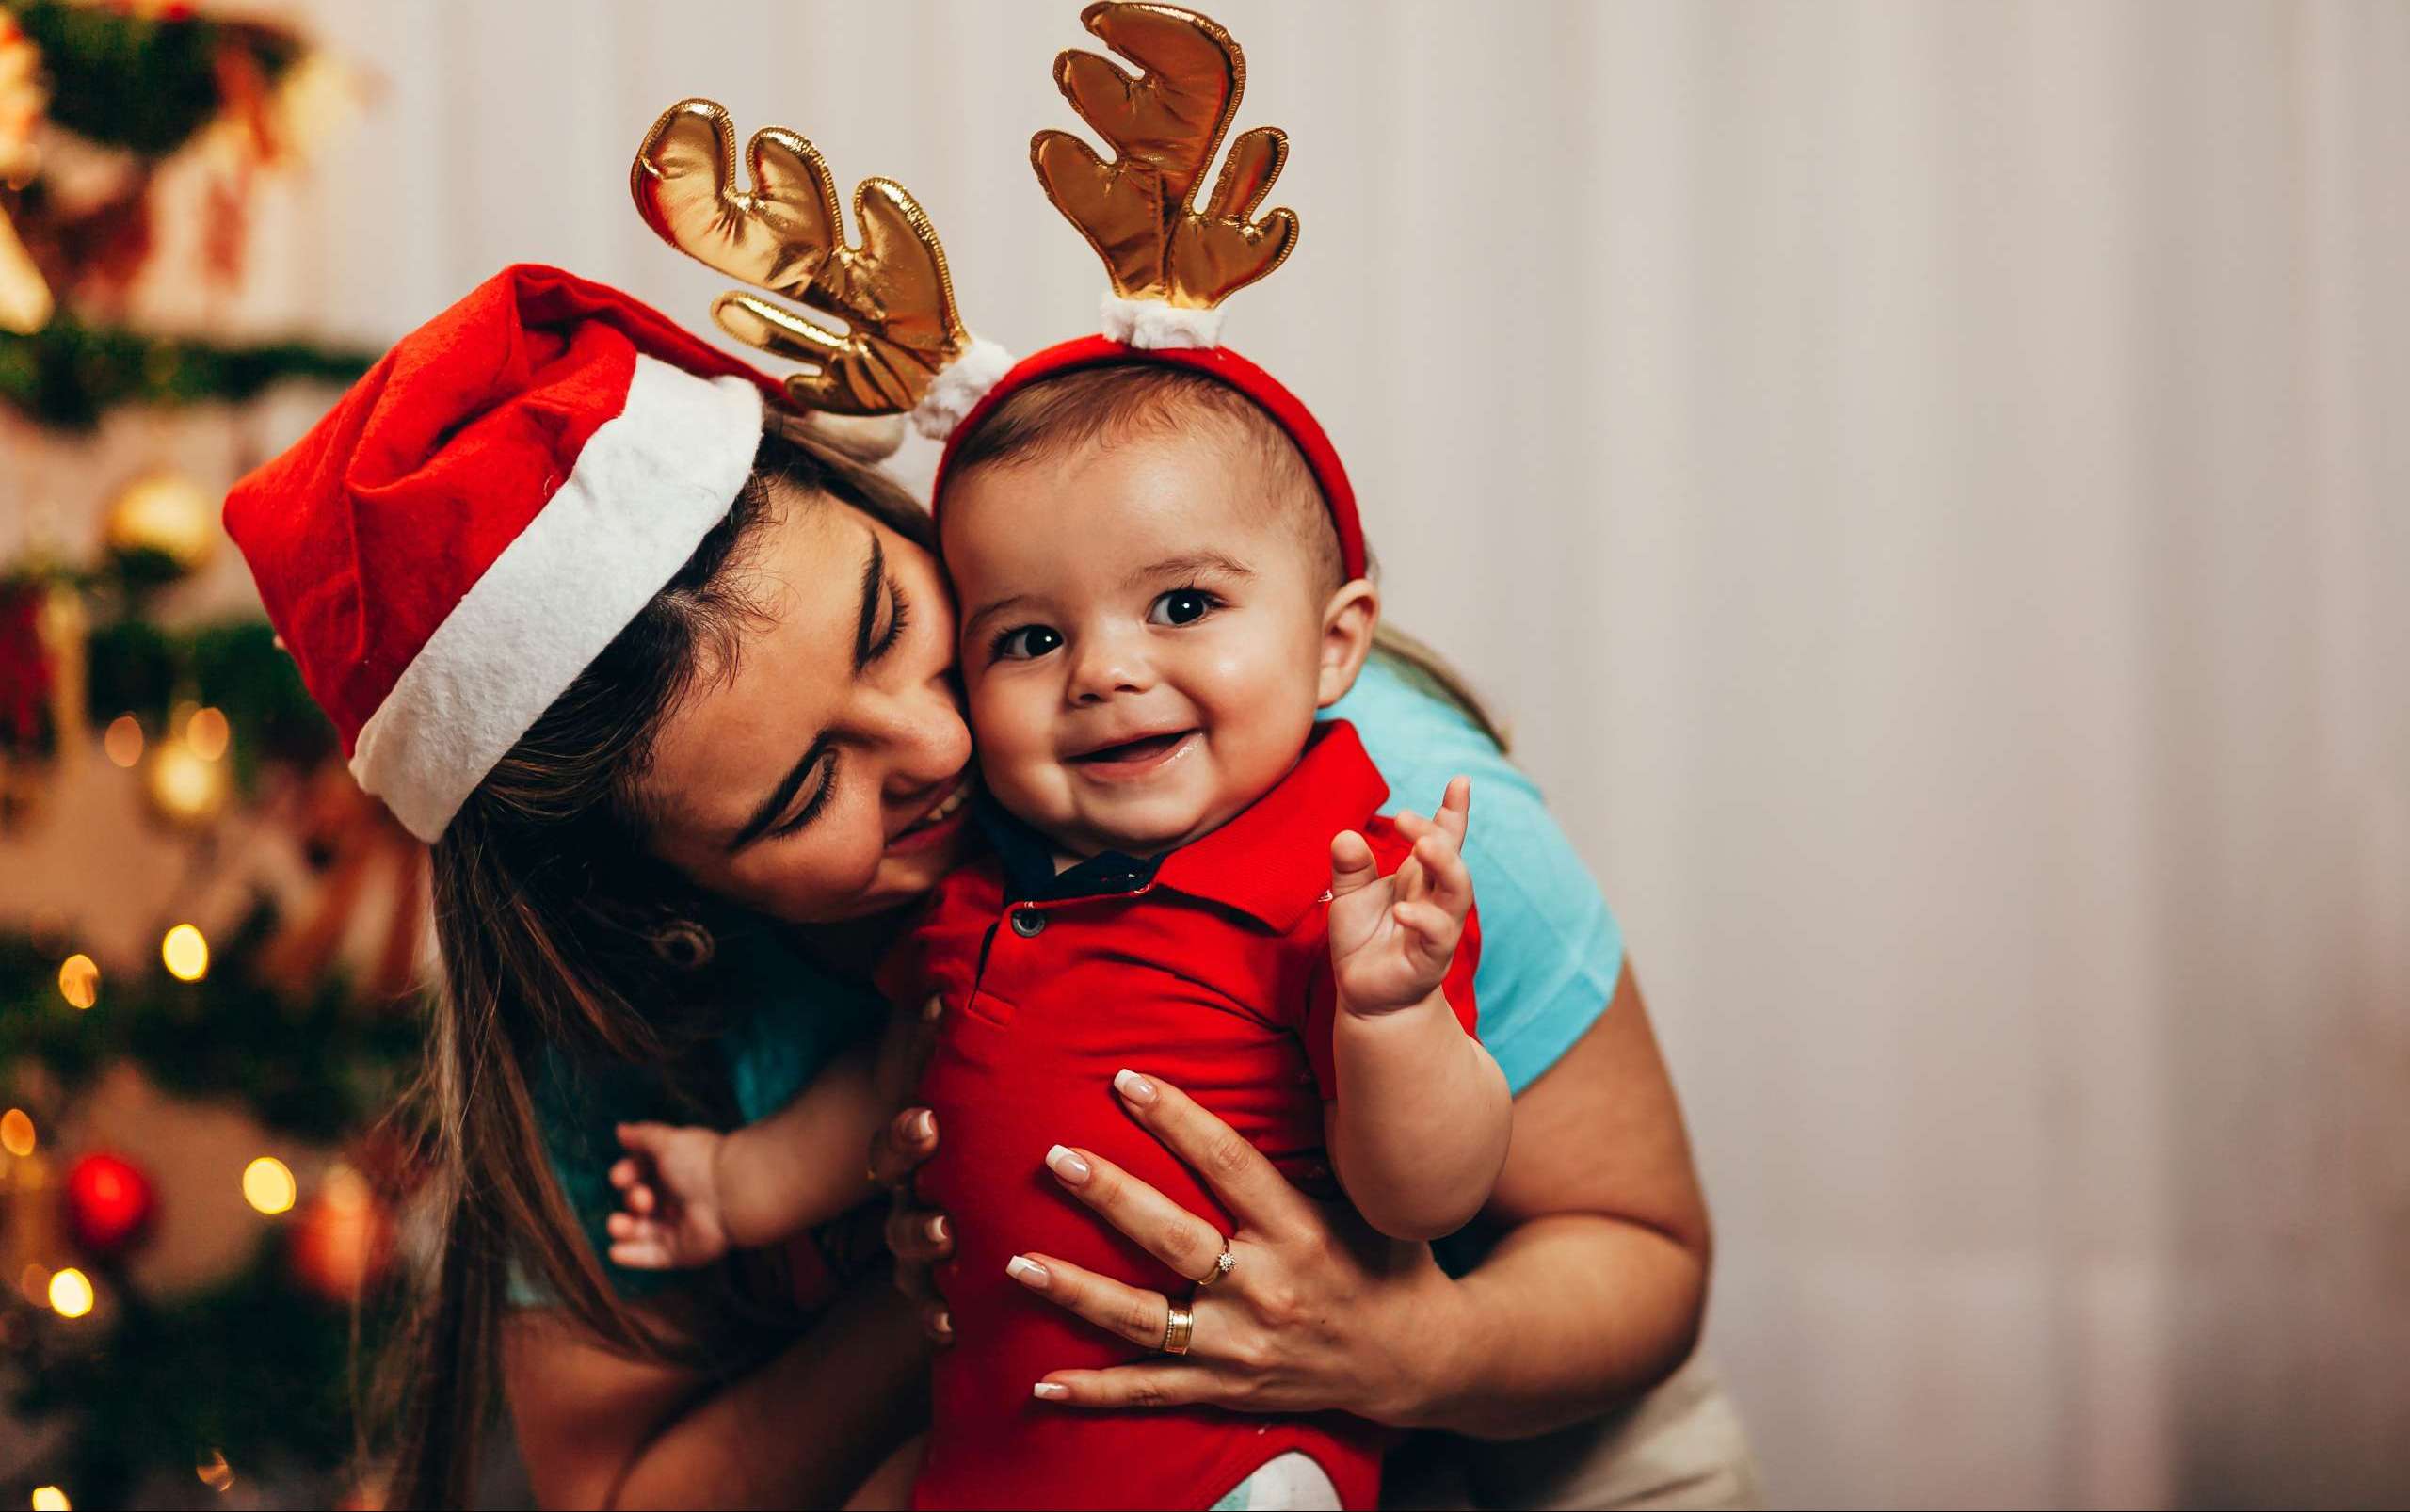 Image of a mother with her baby, accompanying family law article "Coping with christmas – tips for separated families"